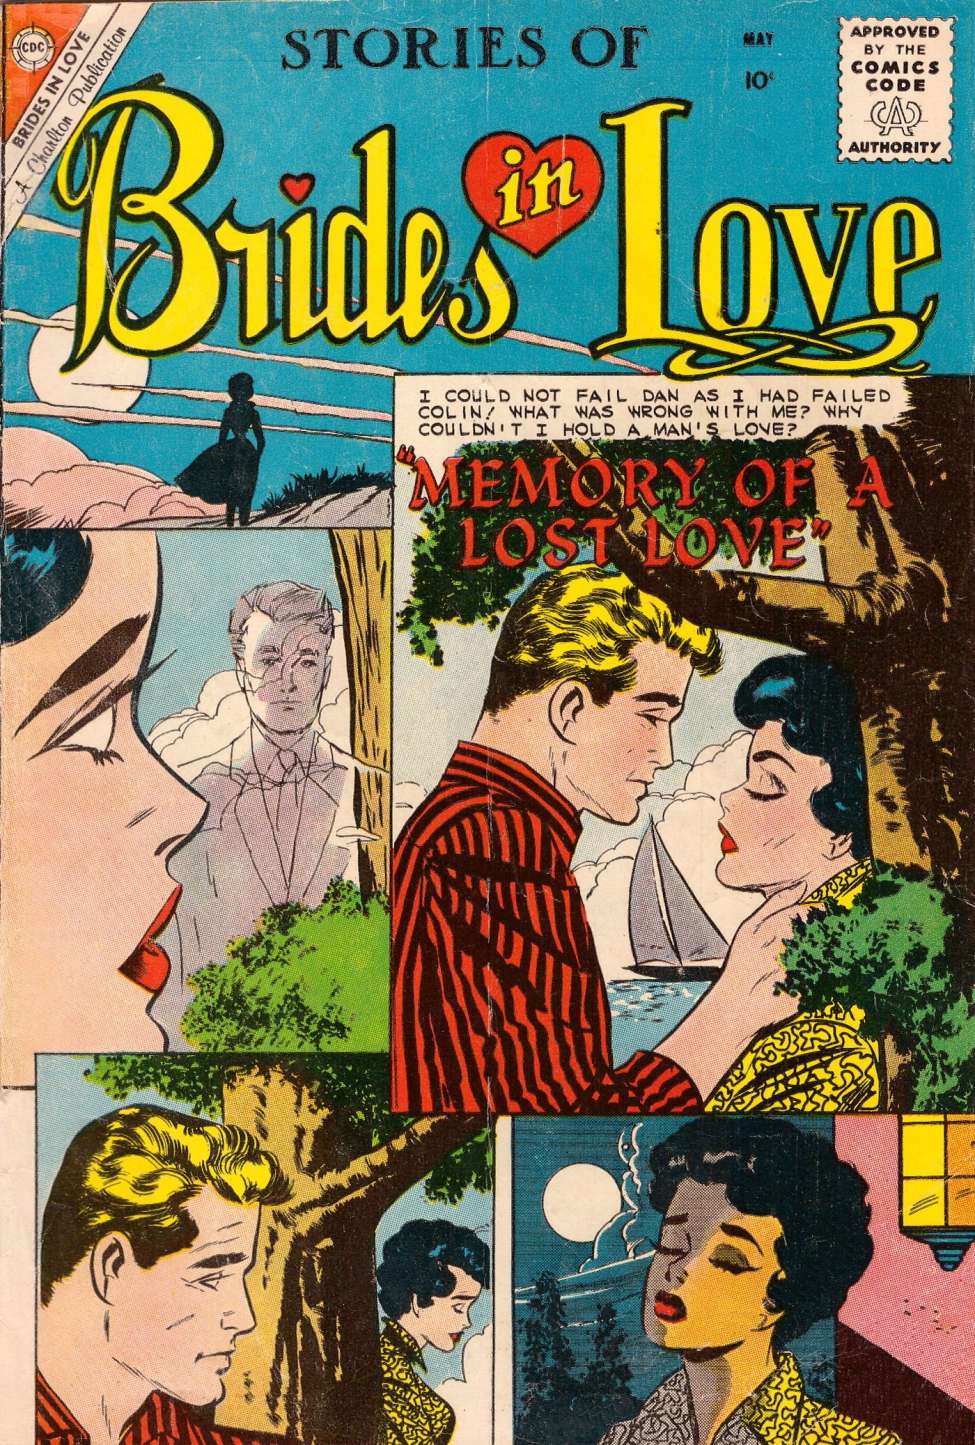 Comic Book Cover For Brides in Love 18